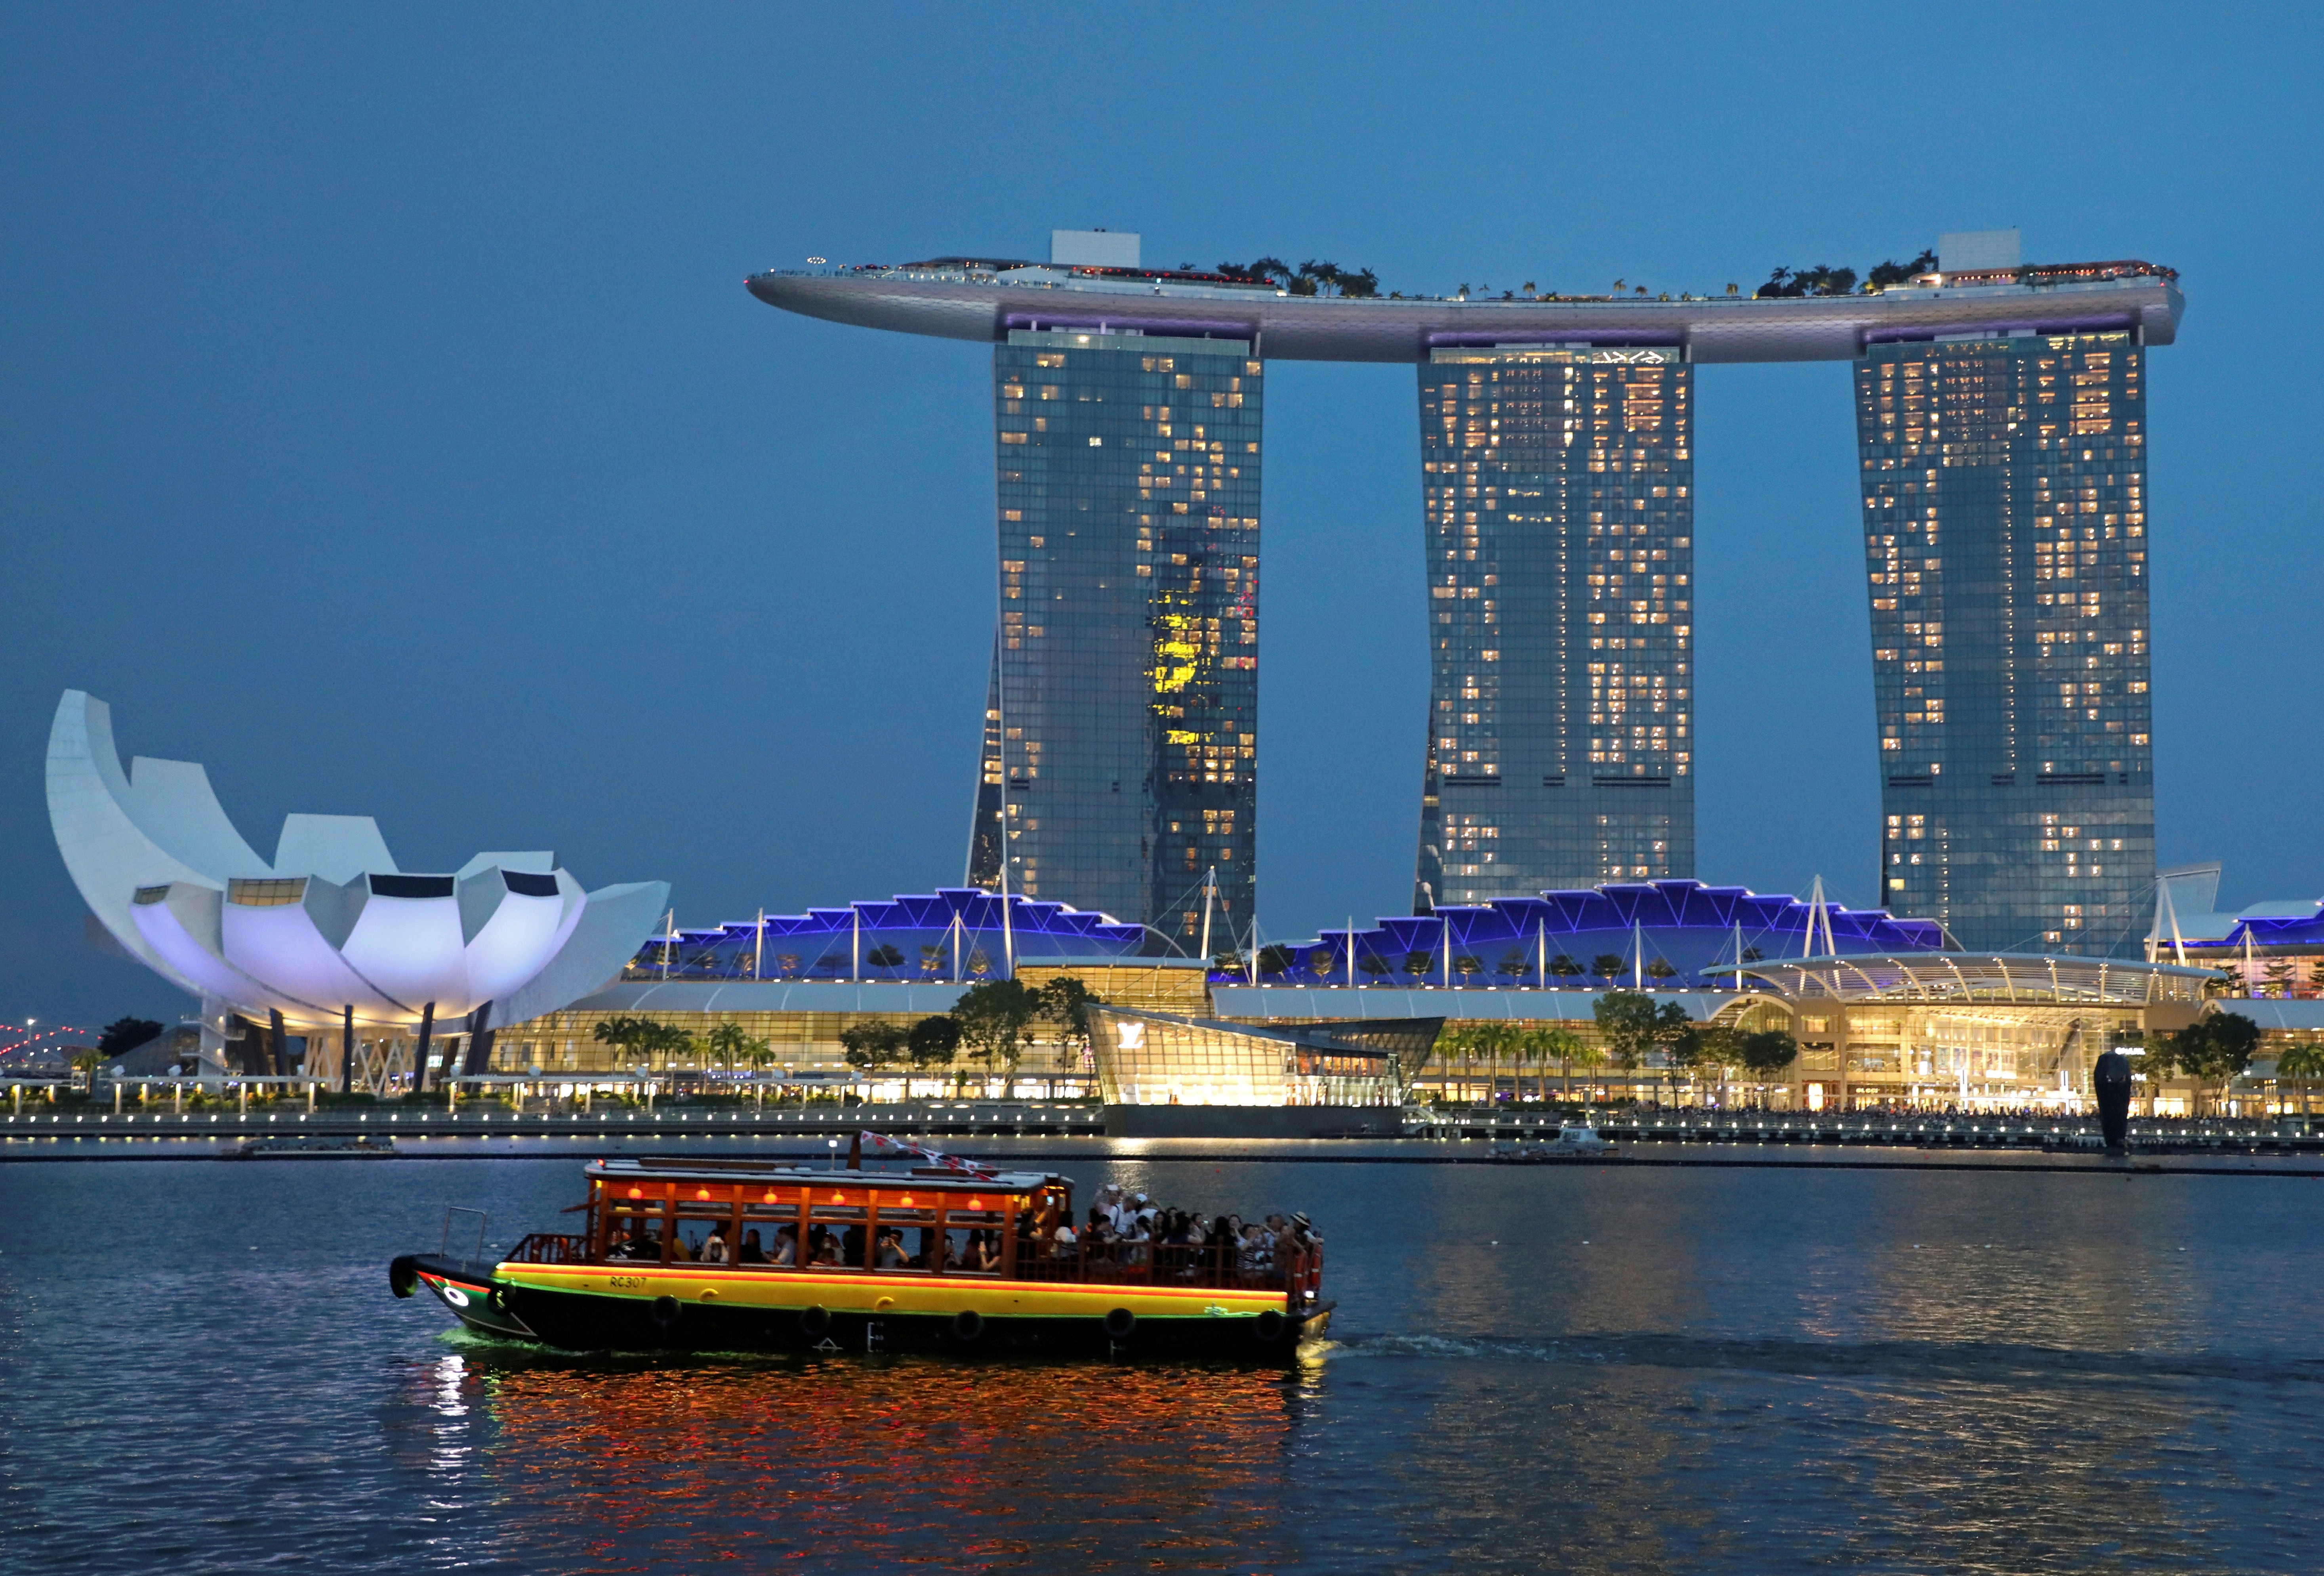 Marina Bay Sands hires law firm to probe over $1.36 billion in